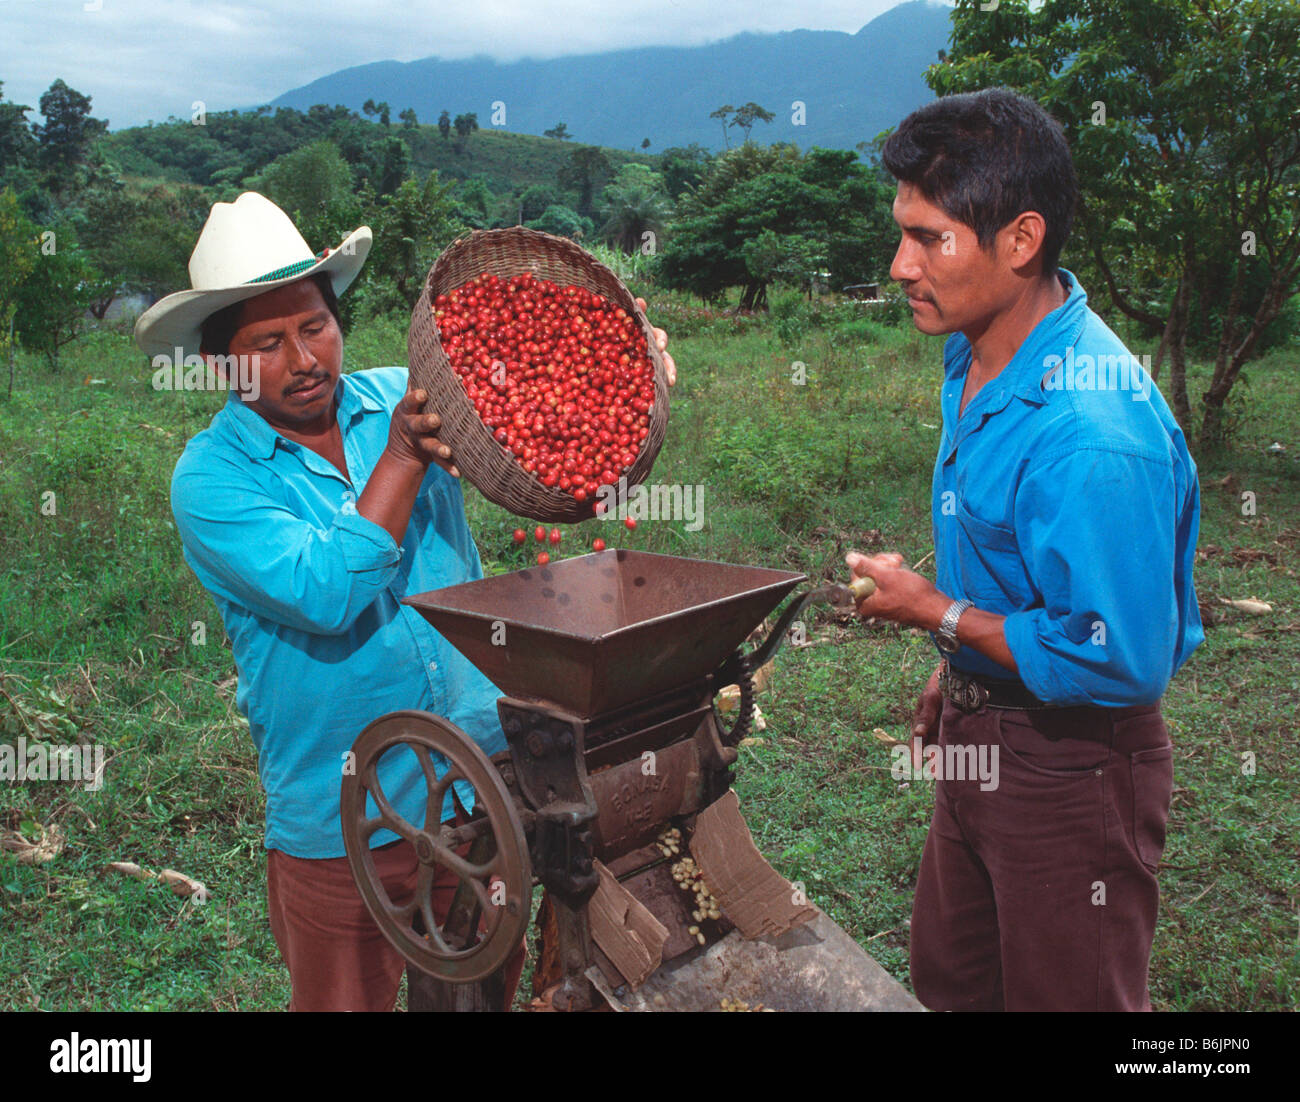 Mexico, Chiapas. Tzeltal Indians de-pulp organic coffee in Ejido San Luis. It is shade-grown in the Lacandon rainforest. Stock Photo